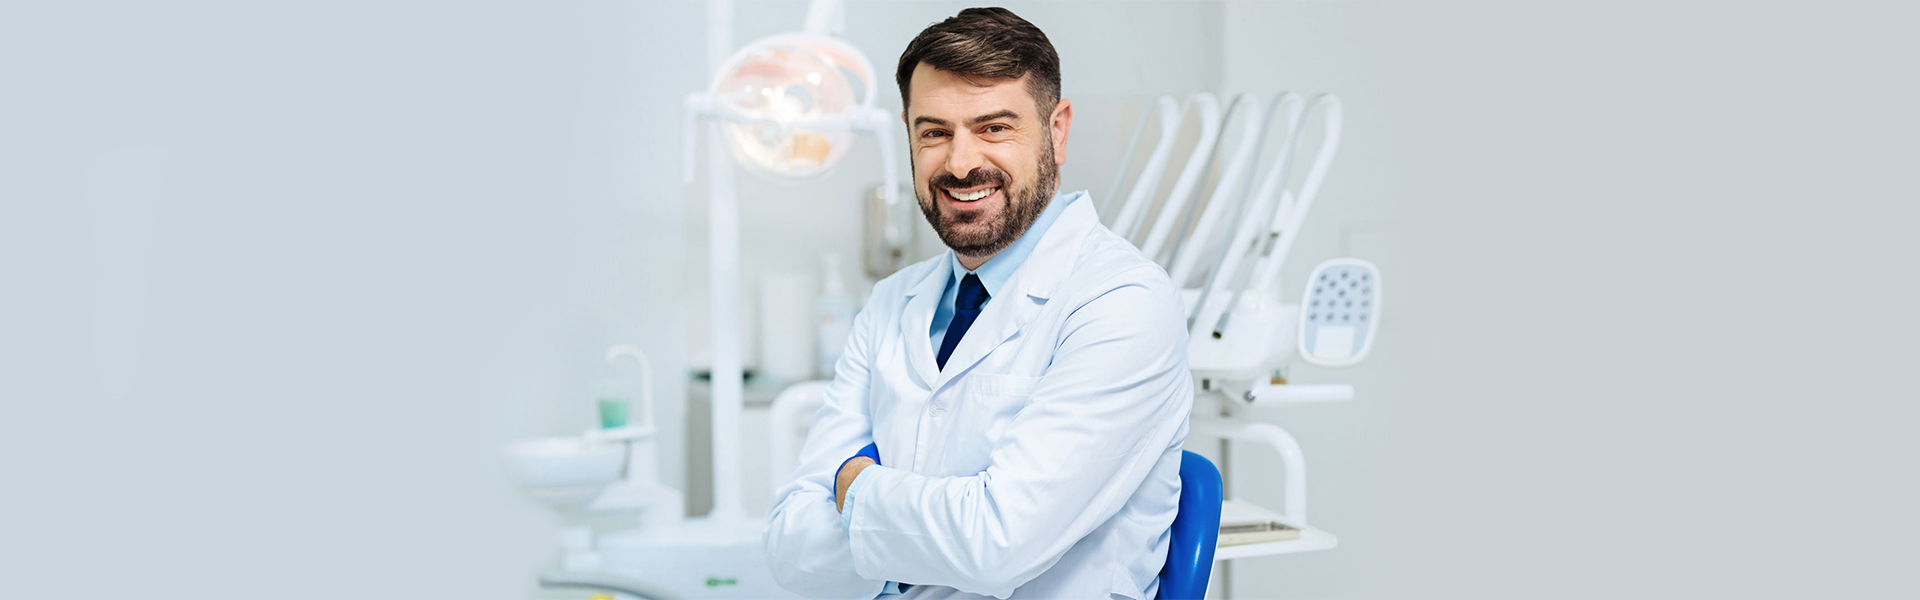 Preventive Dentistry: What is It and Why Is It Important?